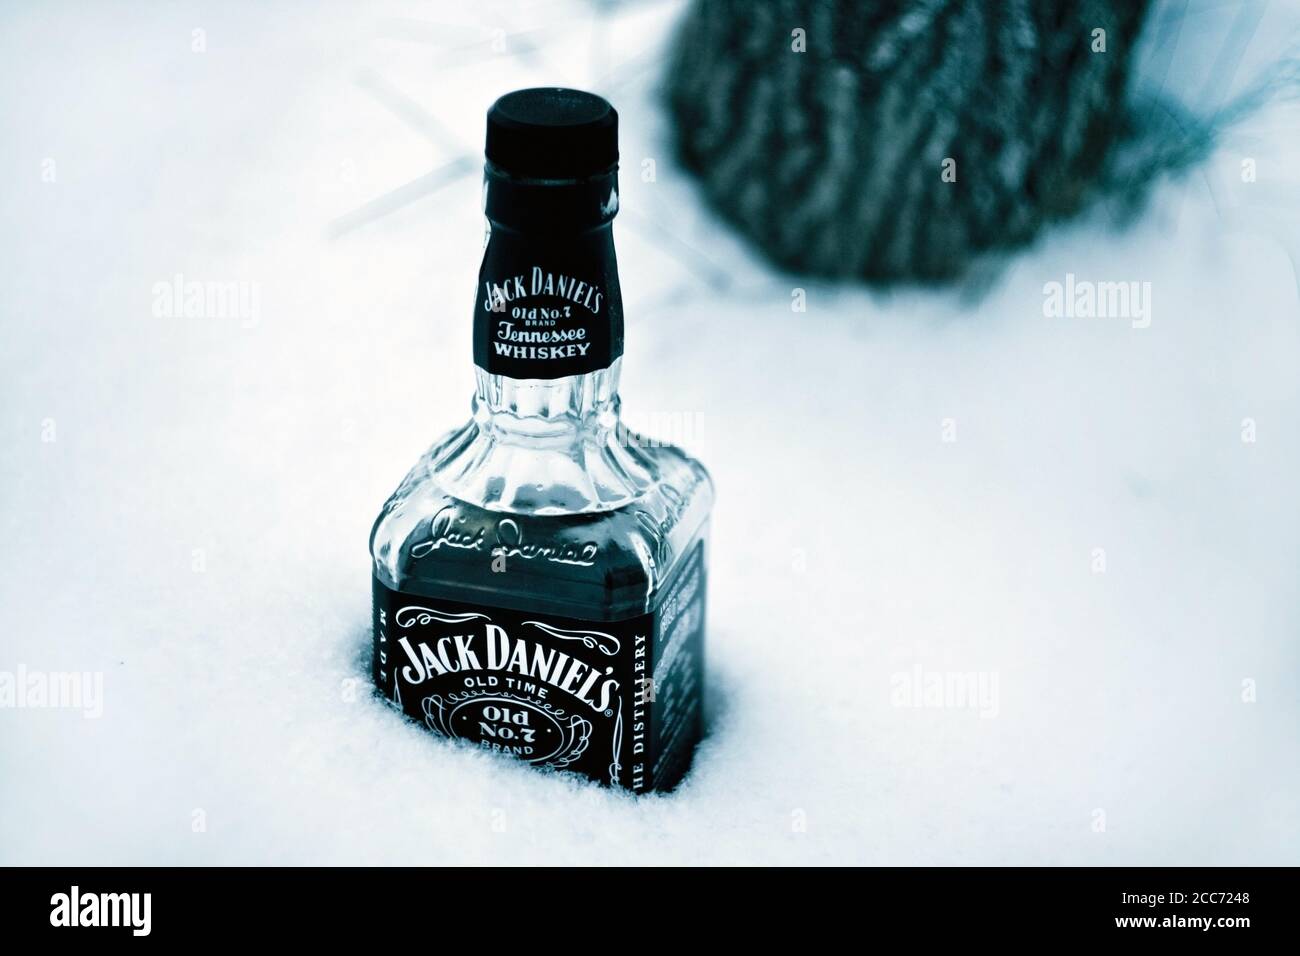 Kyiv, Ukraine - January 1, 2011: Jack Daniel's whiskey bottle is sticking out from the snow, tree in the background Stock Photo